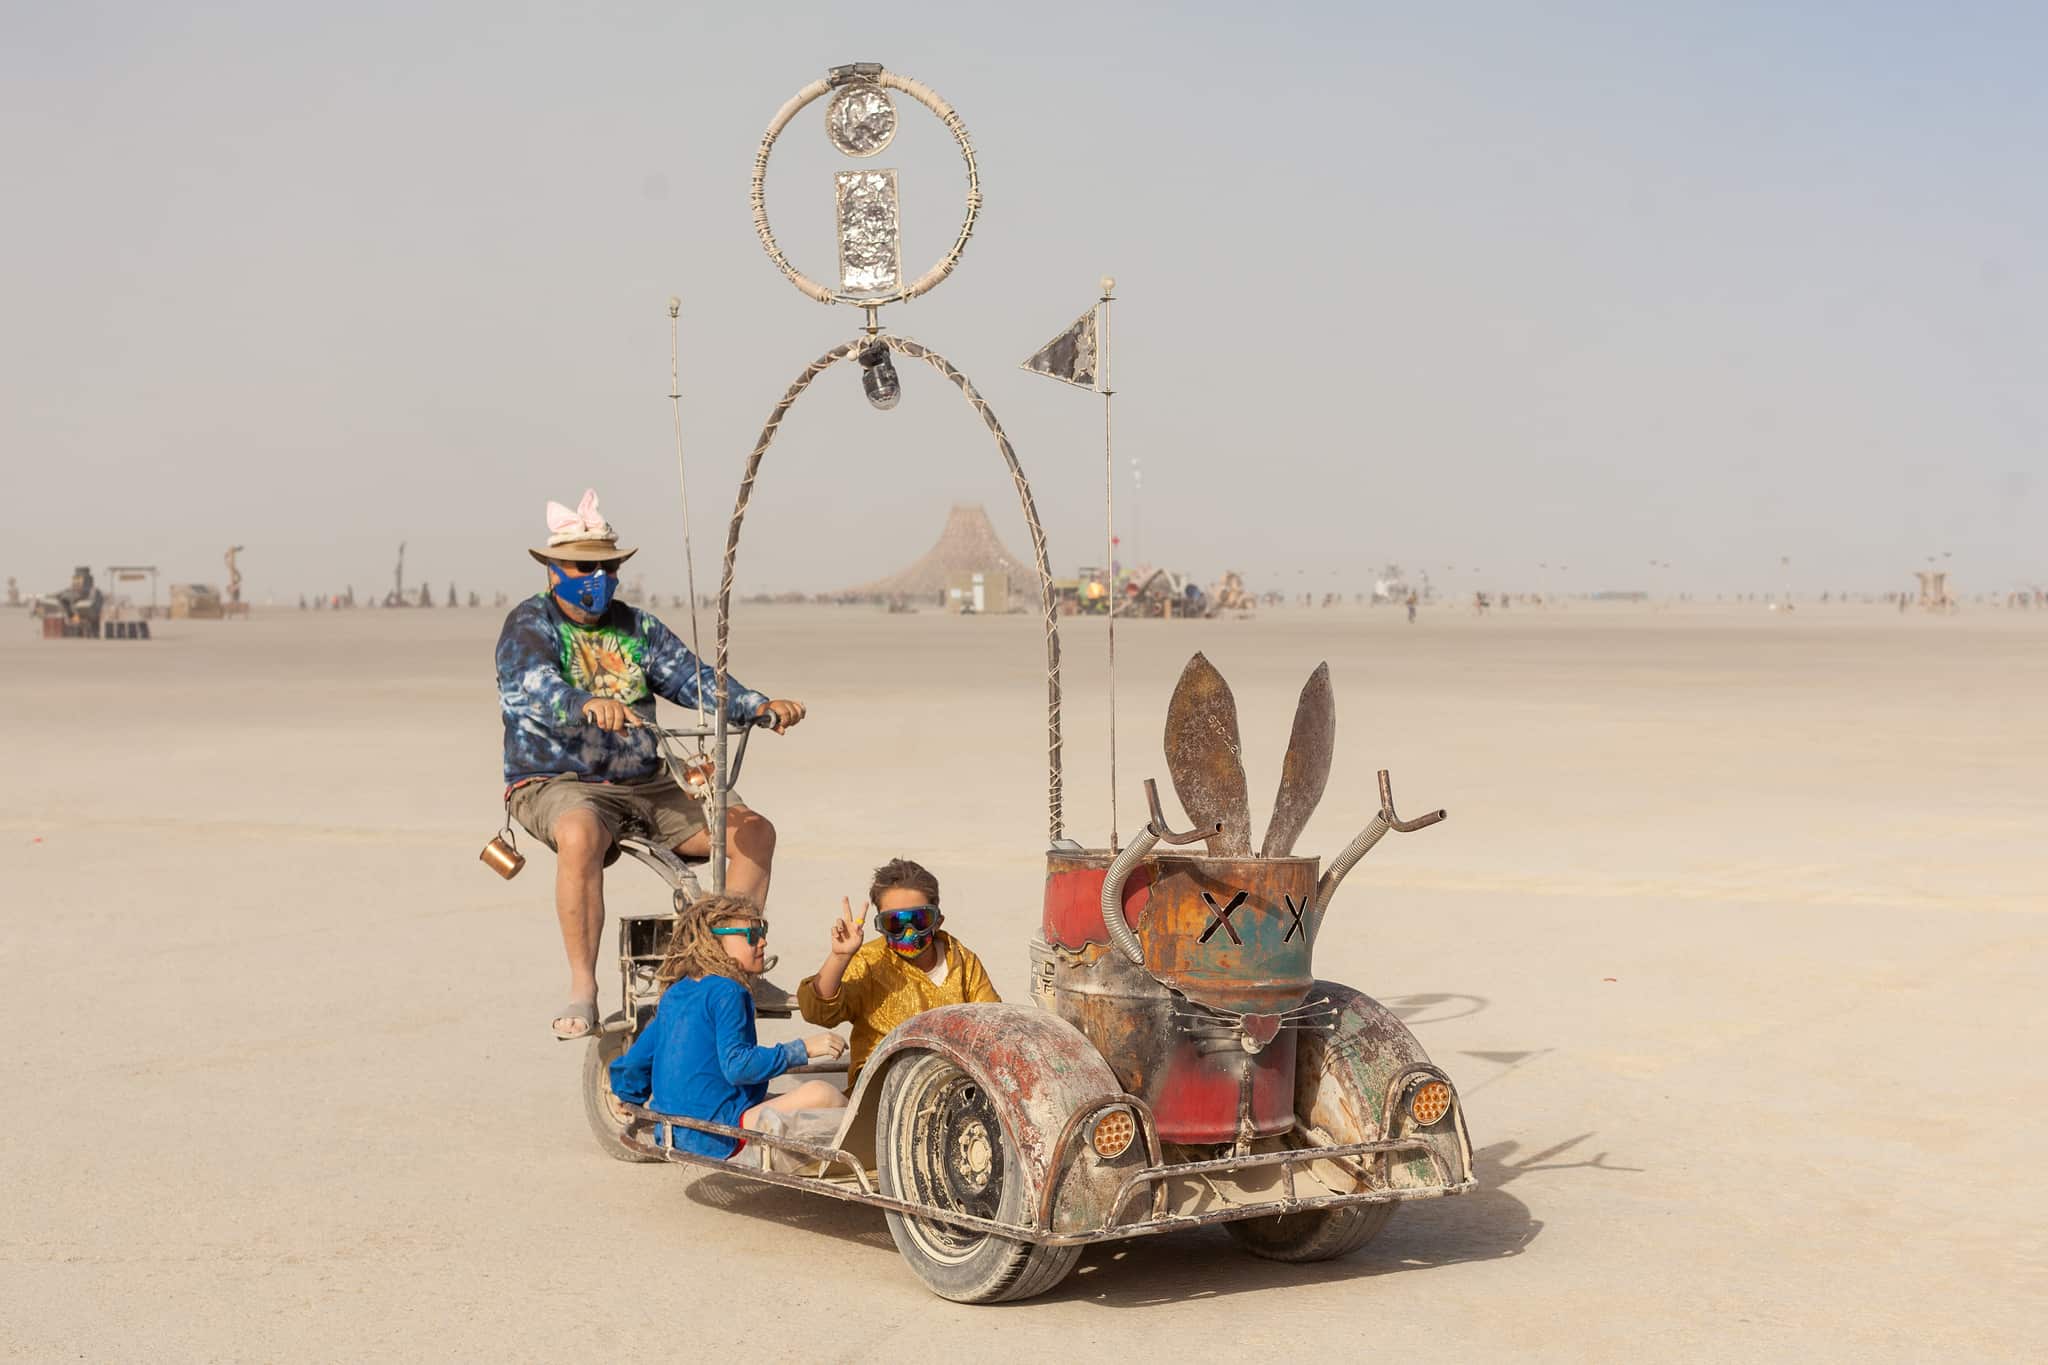 Tickets: how to get to Burning Man-2019?